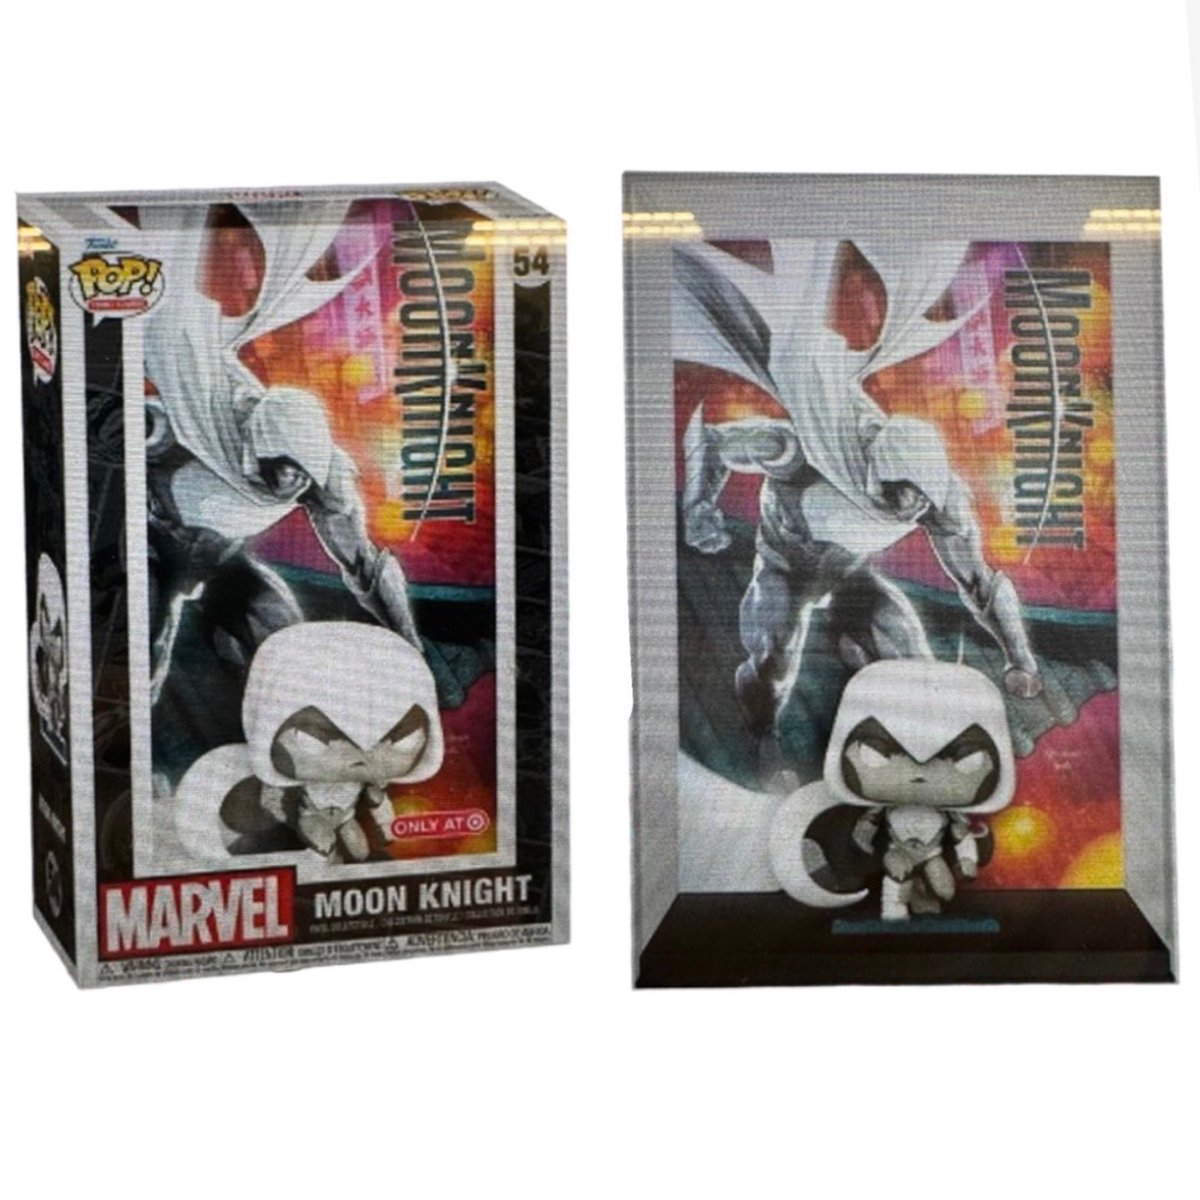 First peek at the new Moon Knight Funko POP! Comic Cover that we teased earlier ~ exclusive to Target land!
Linky ~ fnkpp.com/TS
#Ad #FPN #FunkoPOPNews #Funko #POP #POPVinyl #FunkoPOP #FunkoSoda